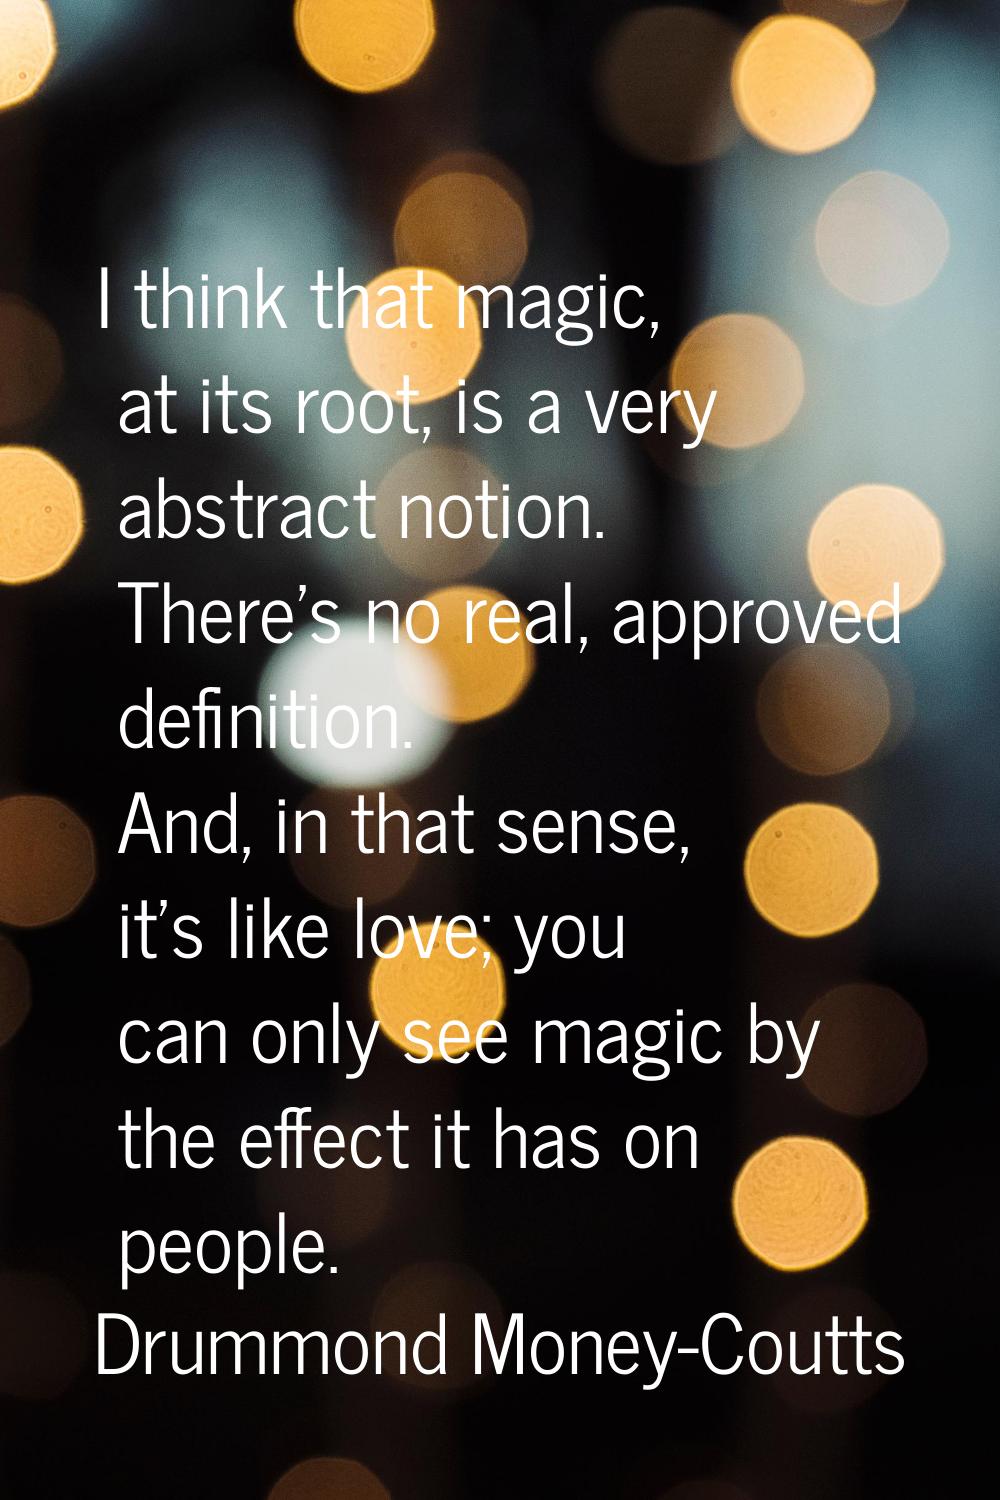 I think that magic, at its root, is a very abstract notion. There's no real, approved definition. A